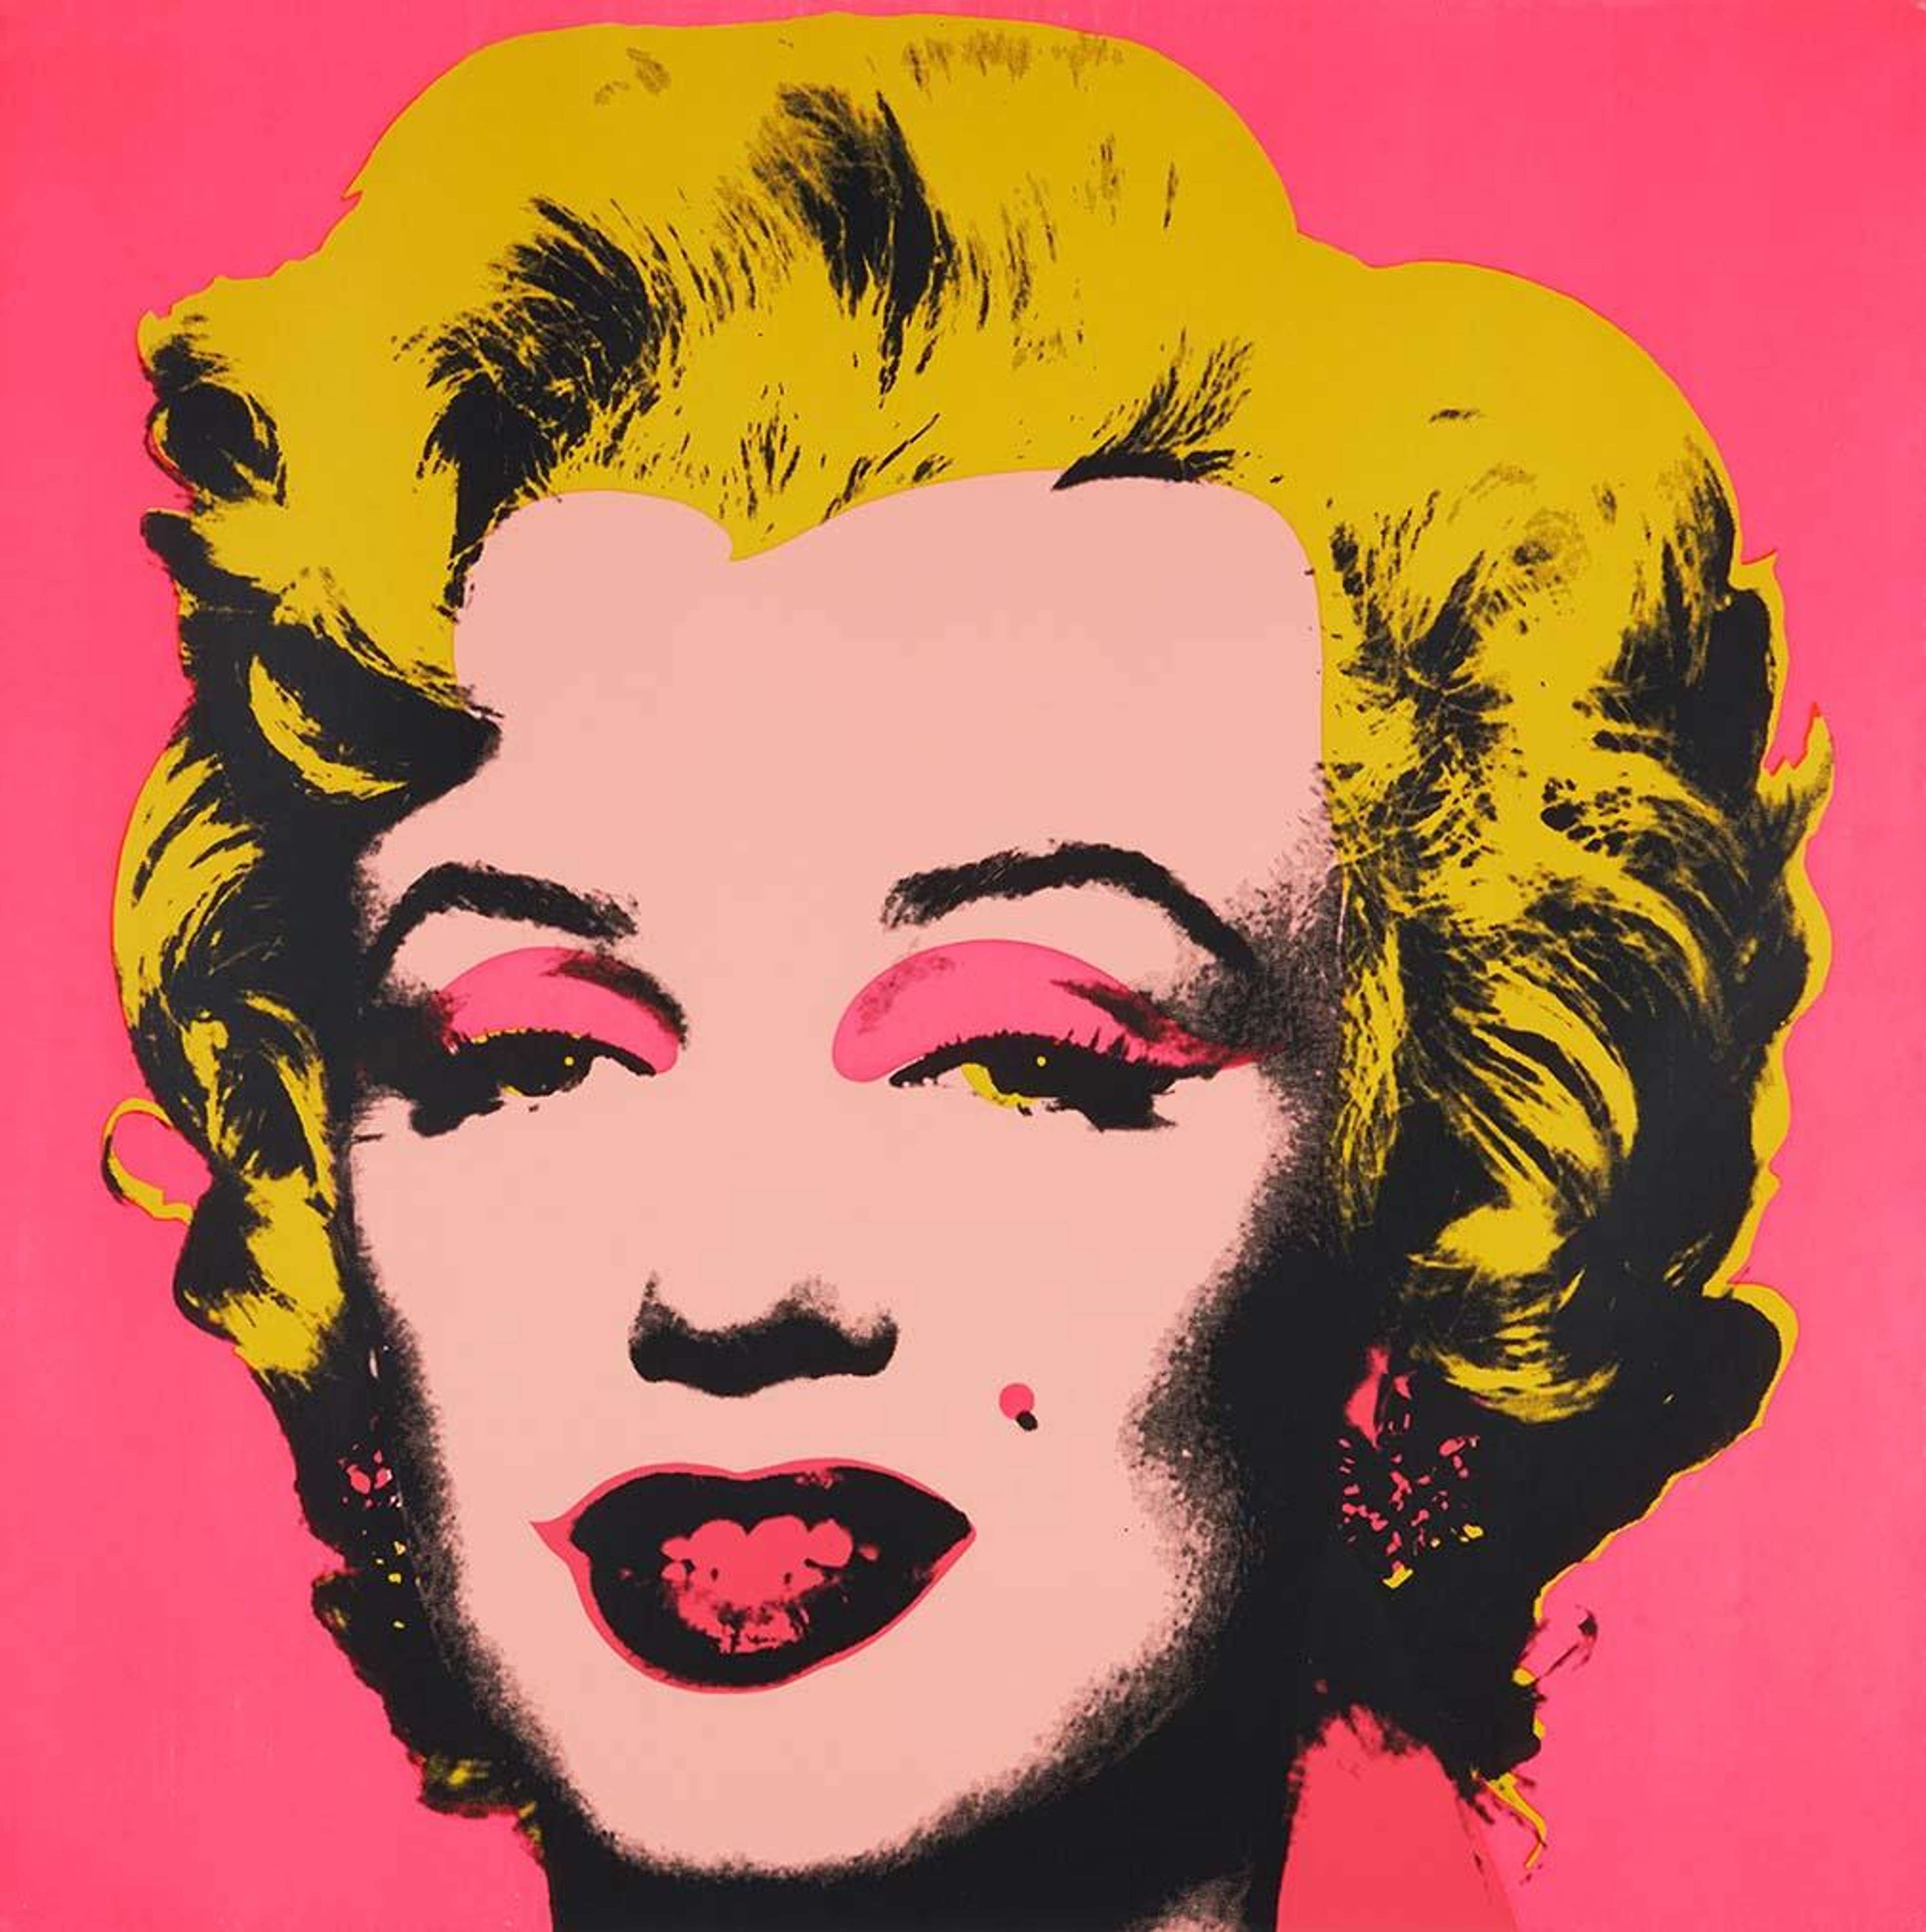 This is a screen print from Andy Warhol’s Marilyn series, a portrait of the world-famous actress Marilyn Monroe depicted in brilliant hues, with her hair coloured yellow and vivid magenta colouring her lips, eyelids and backdrop.